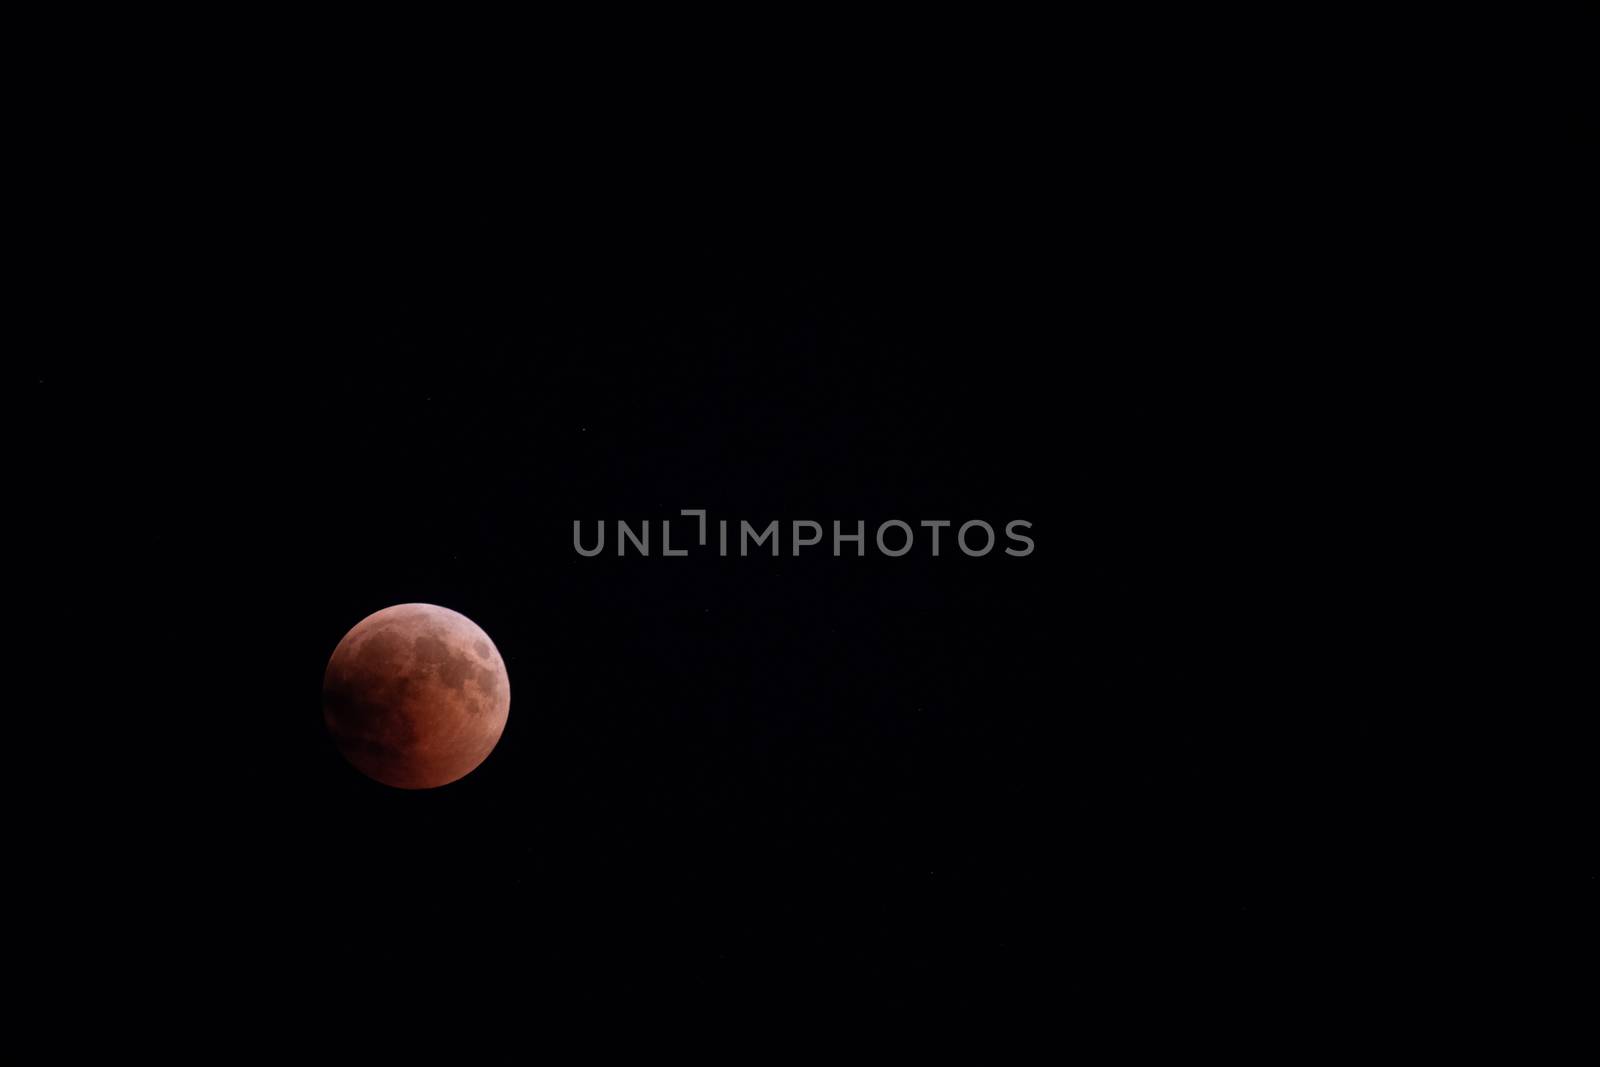 Blood moon during lunar eclipse, blood moon by asafaric